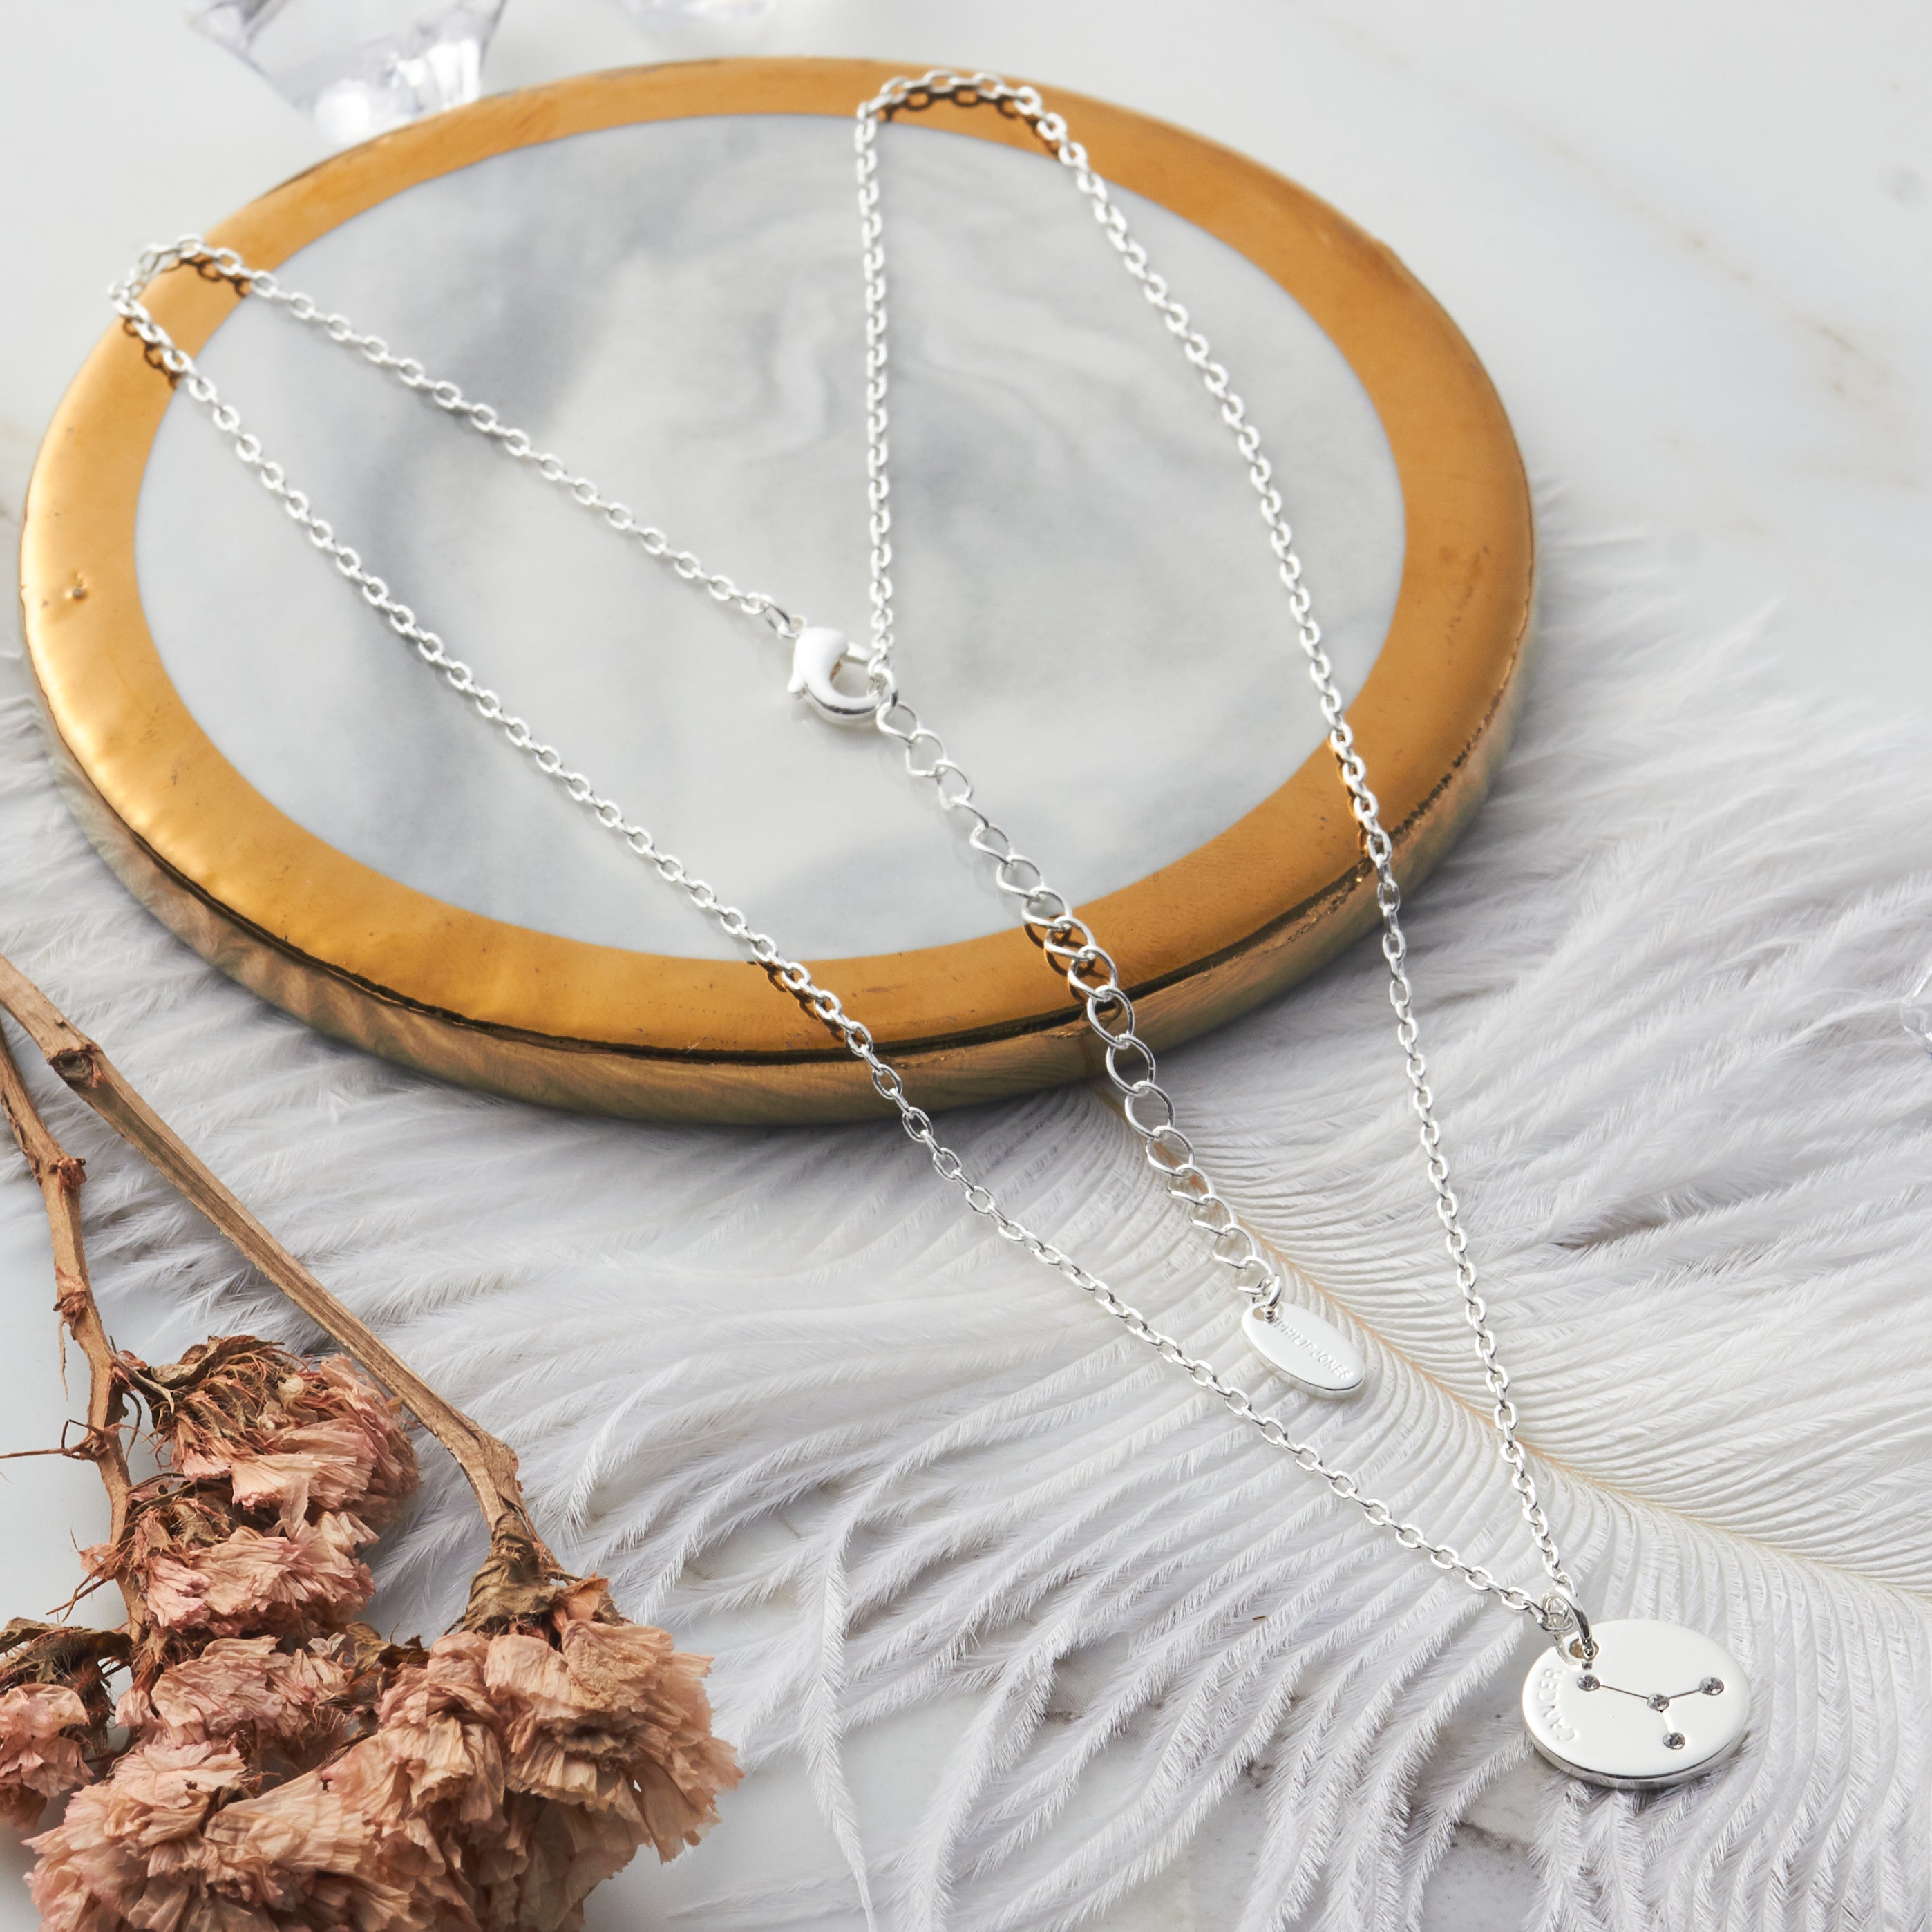 Cancer Zodiac Star Sign Disc Necklace Created with Zircondia® Crystals